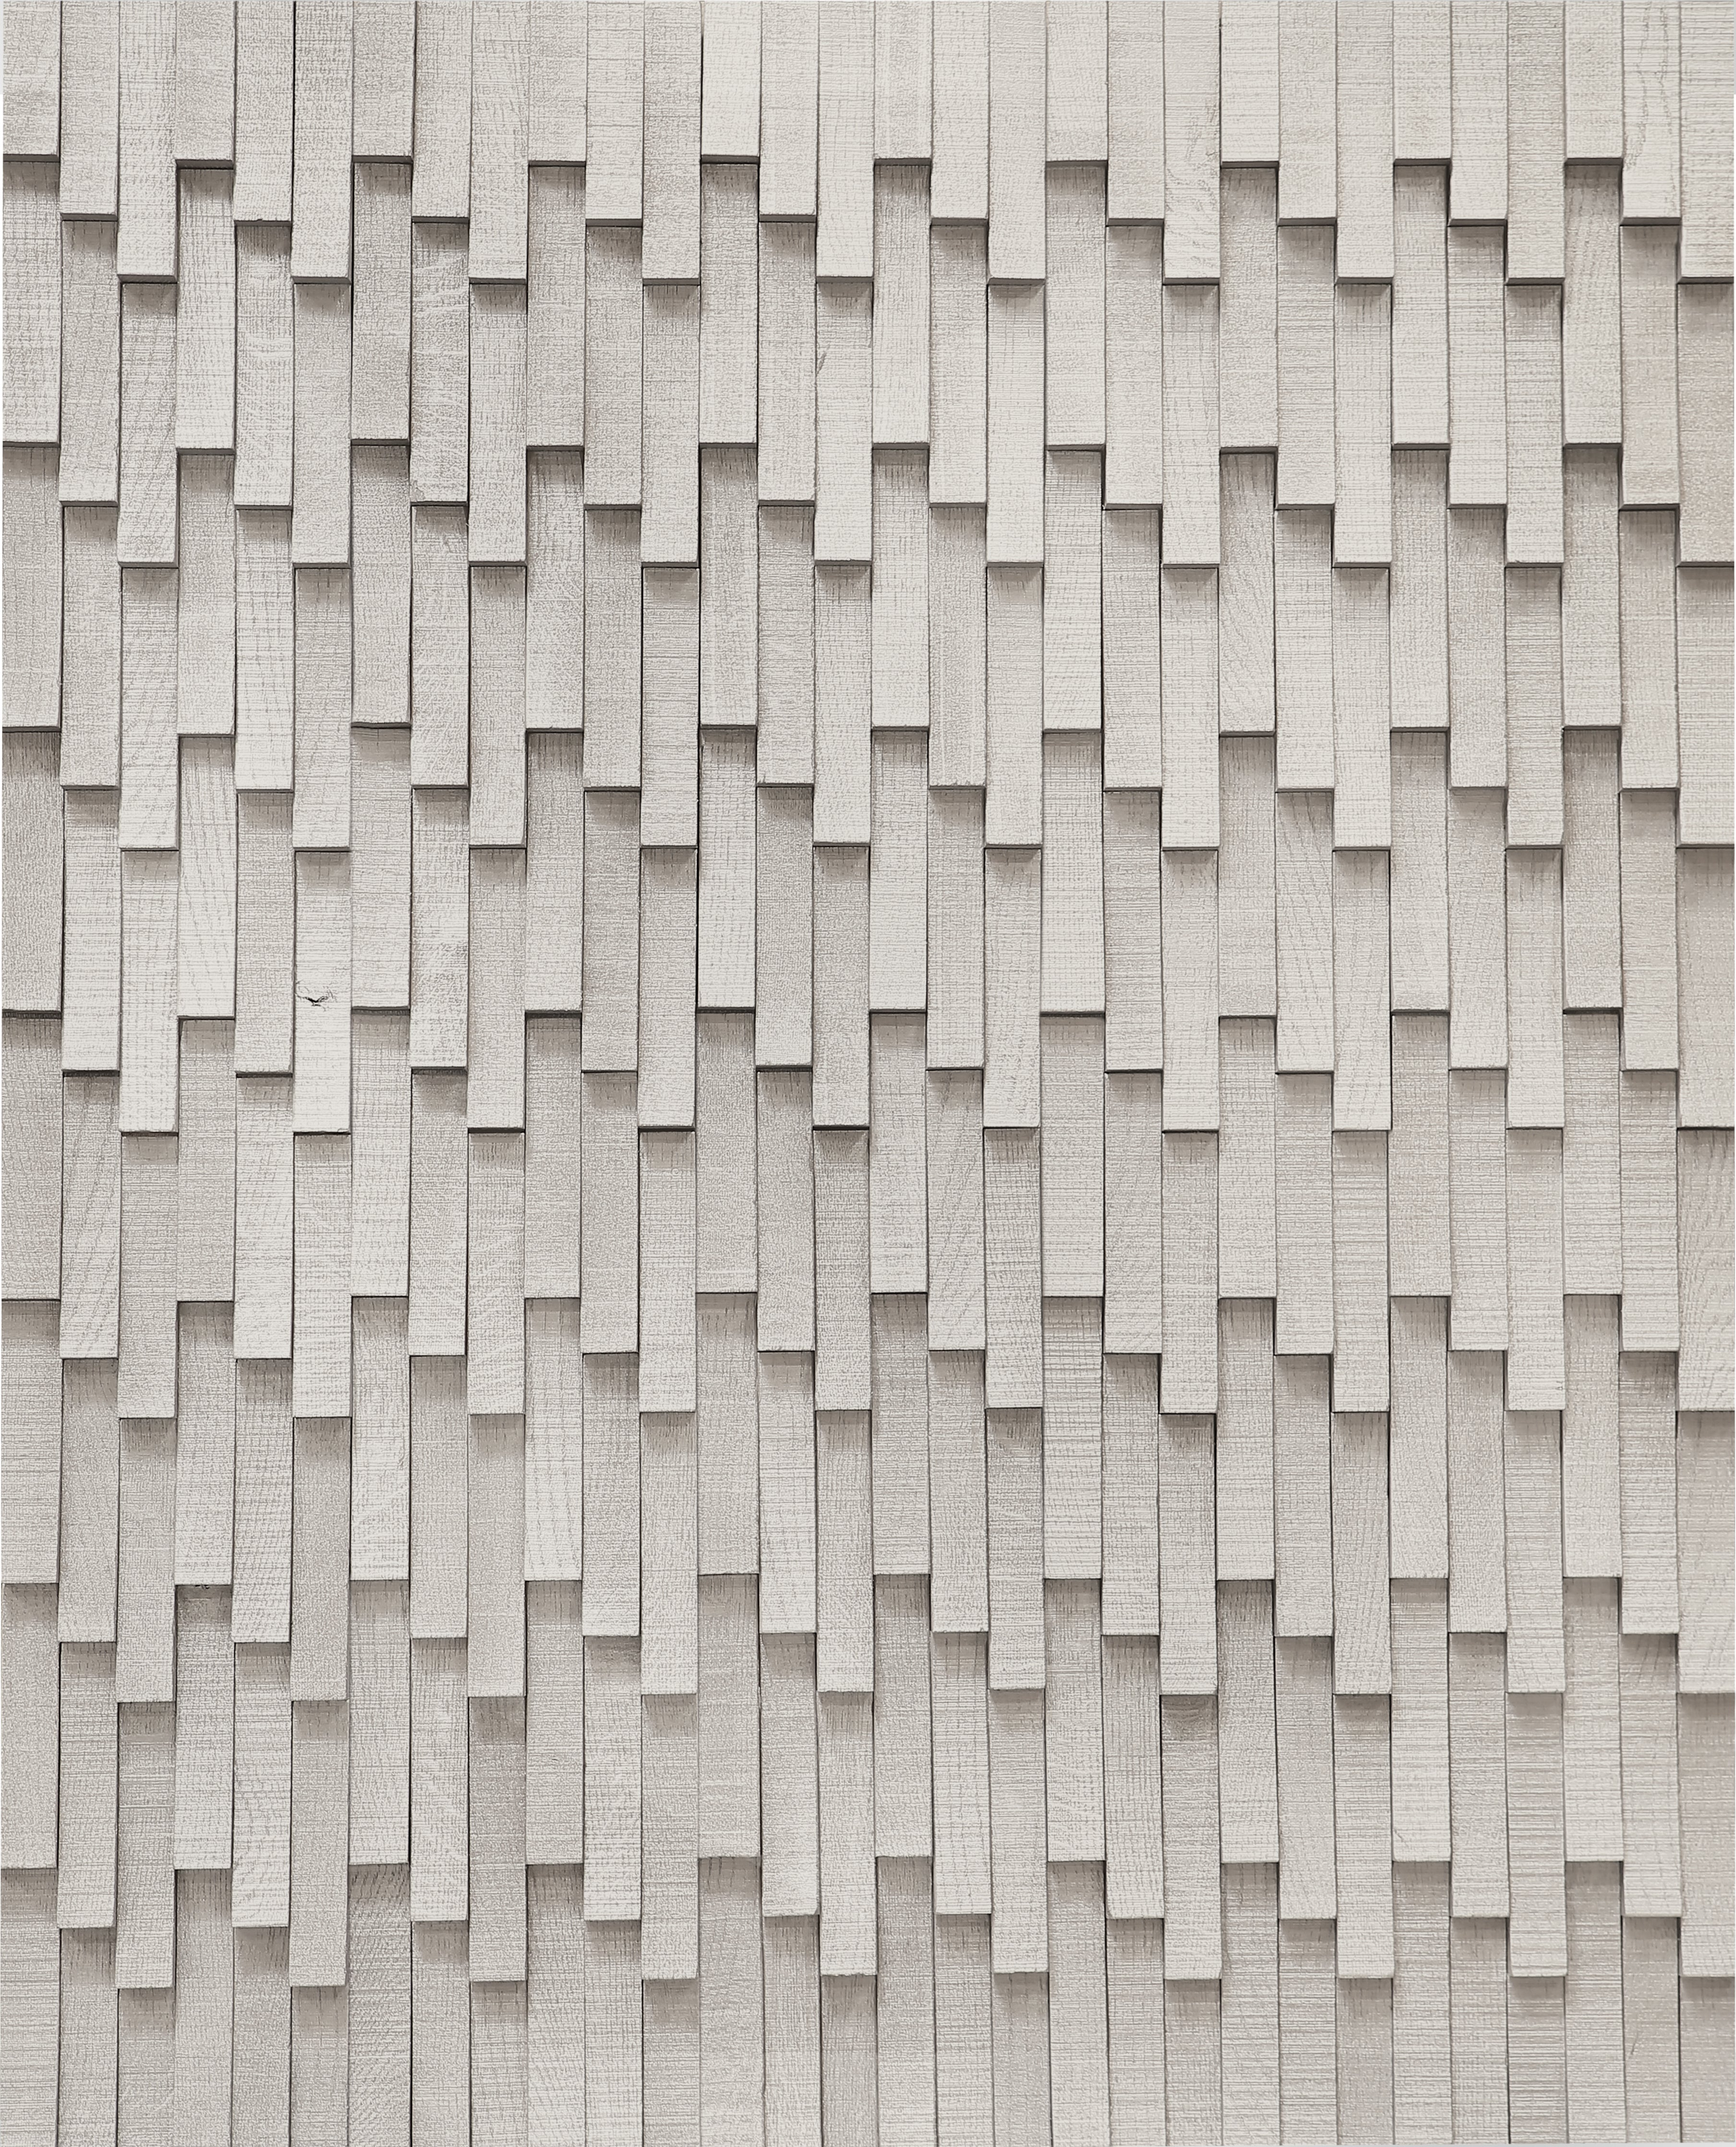 duchateau inceptiv wave silver oak three dimensional wall natural wood panel lacquer for interior use distributed by surface group international